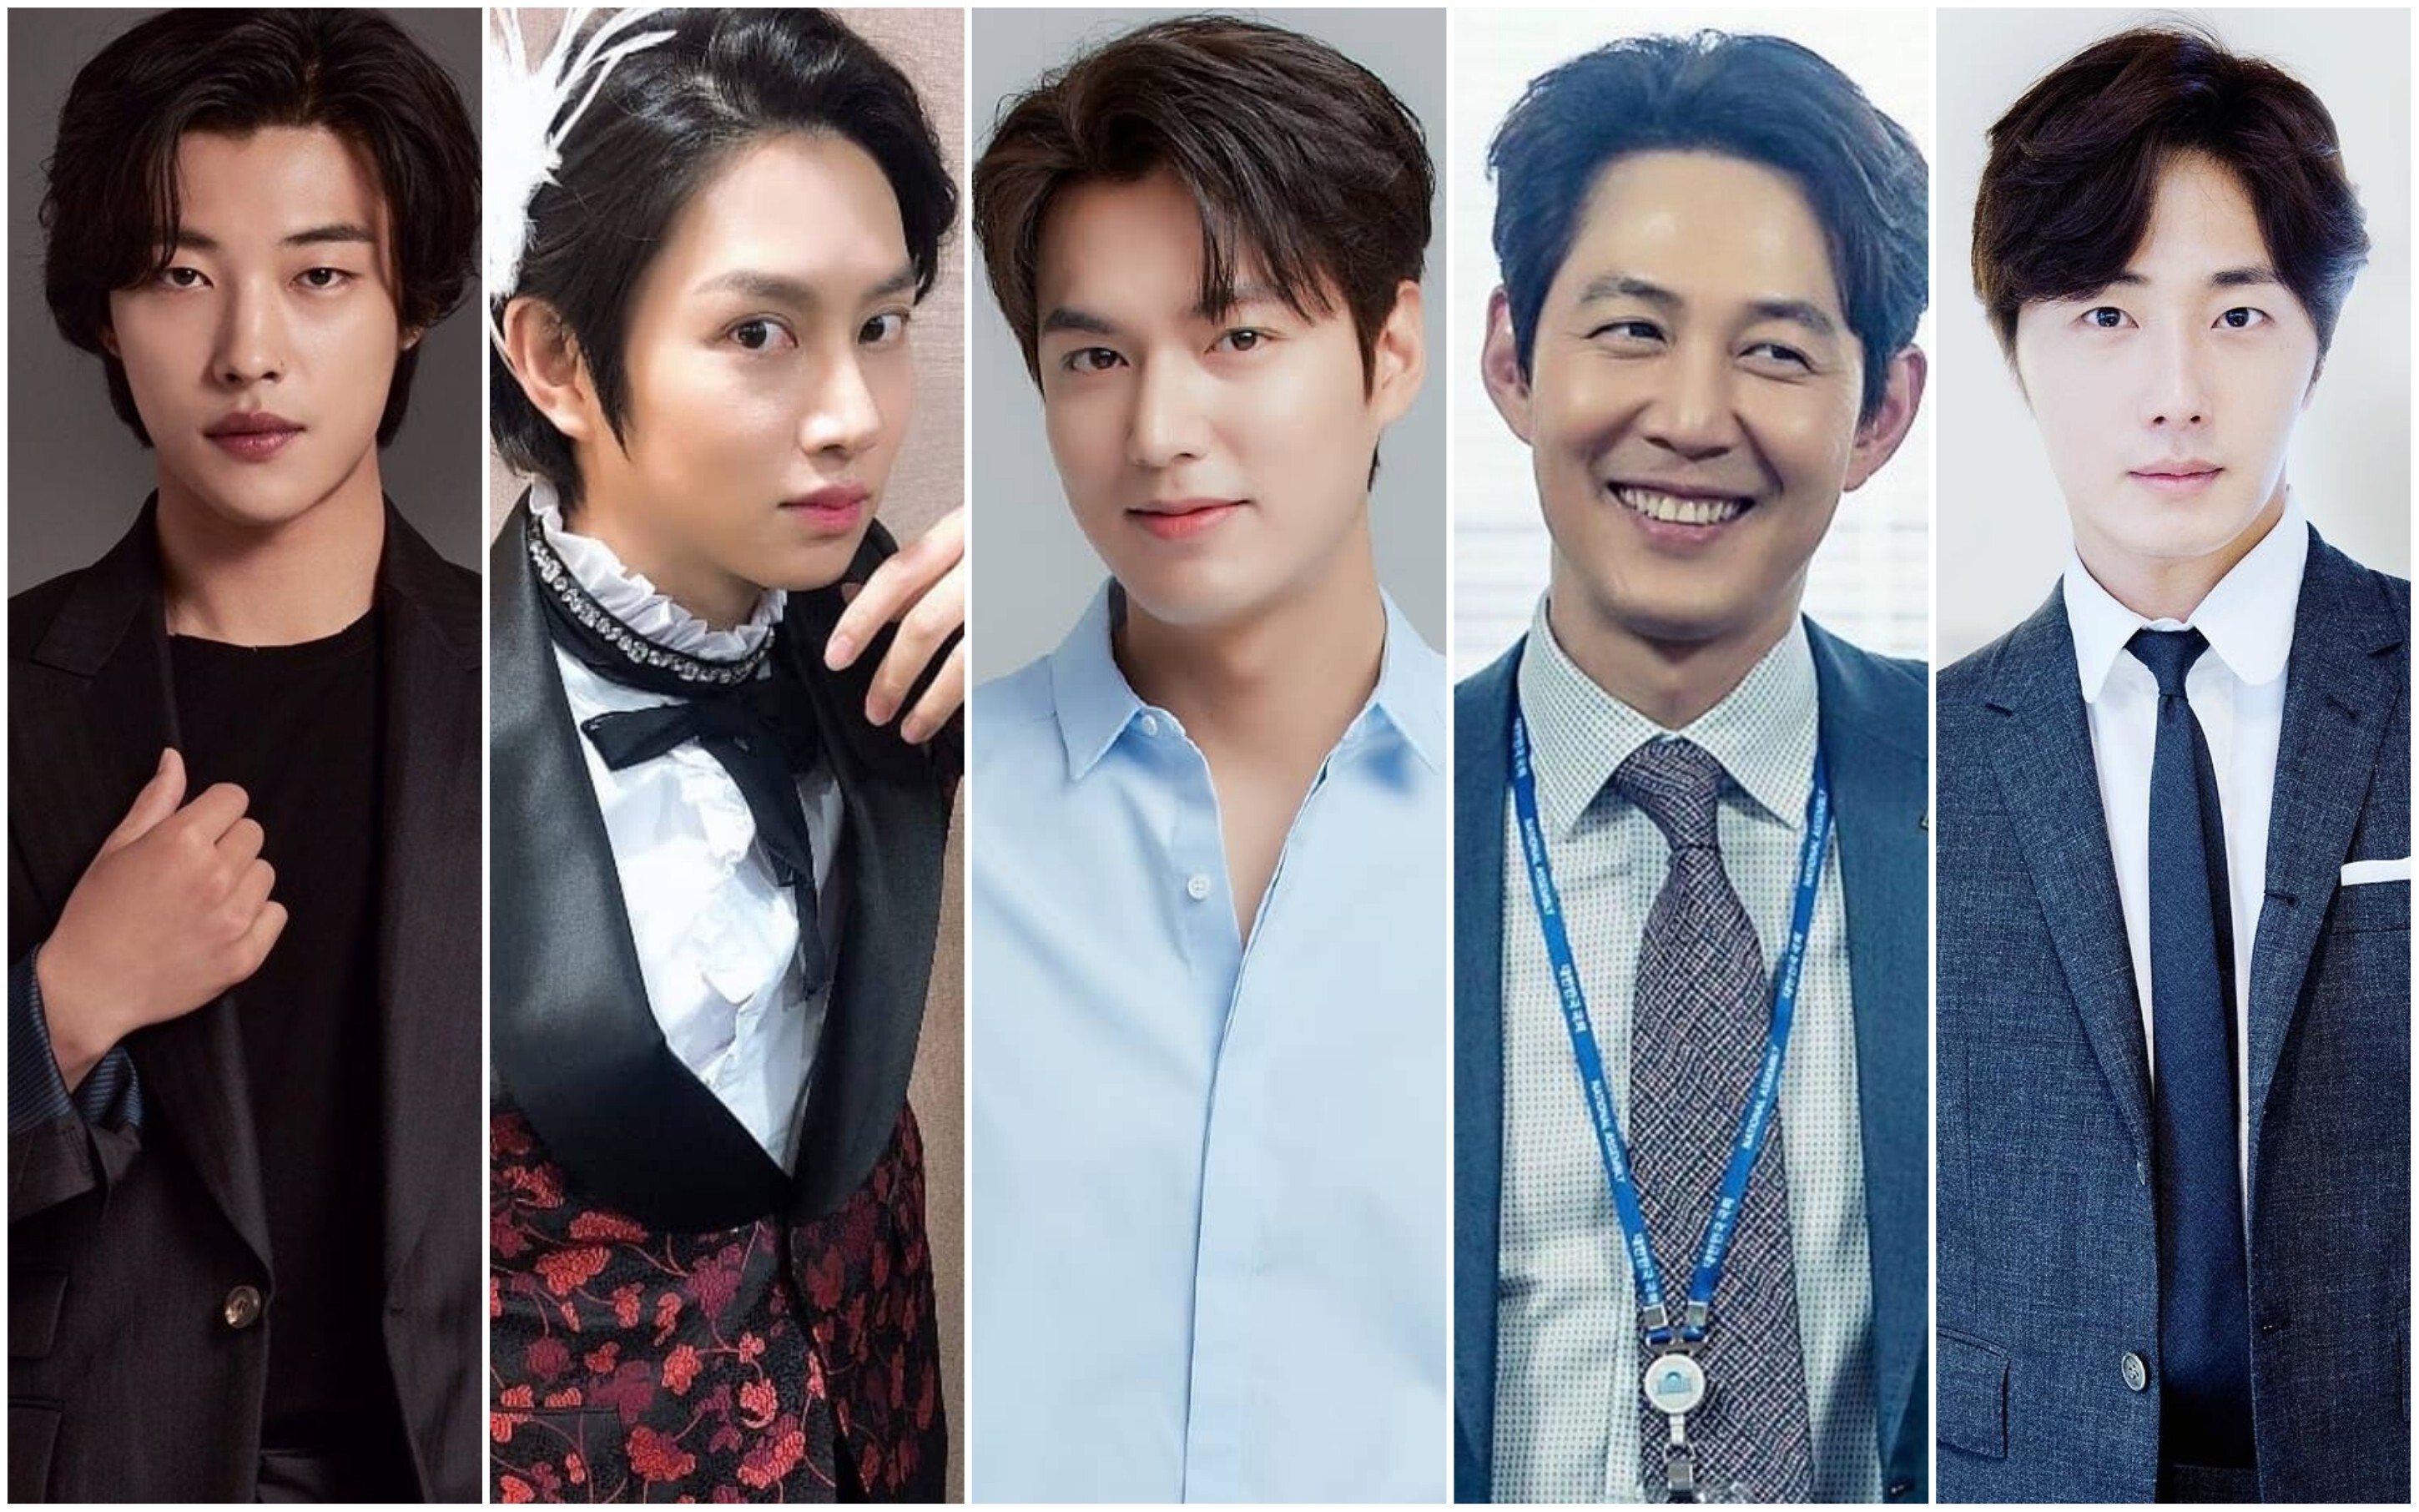 Lee Min-ho's best friends – why Woo Do-hwan, Kim Hee-chul, Jung Il-woo and  Lee Jung-jae are besties with The King: Eternal Monarch star | South China  Morning Post